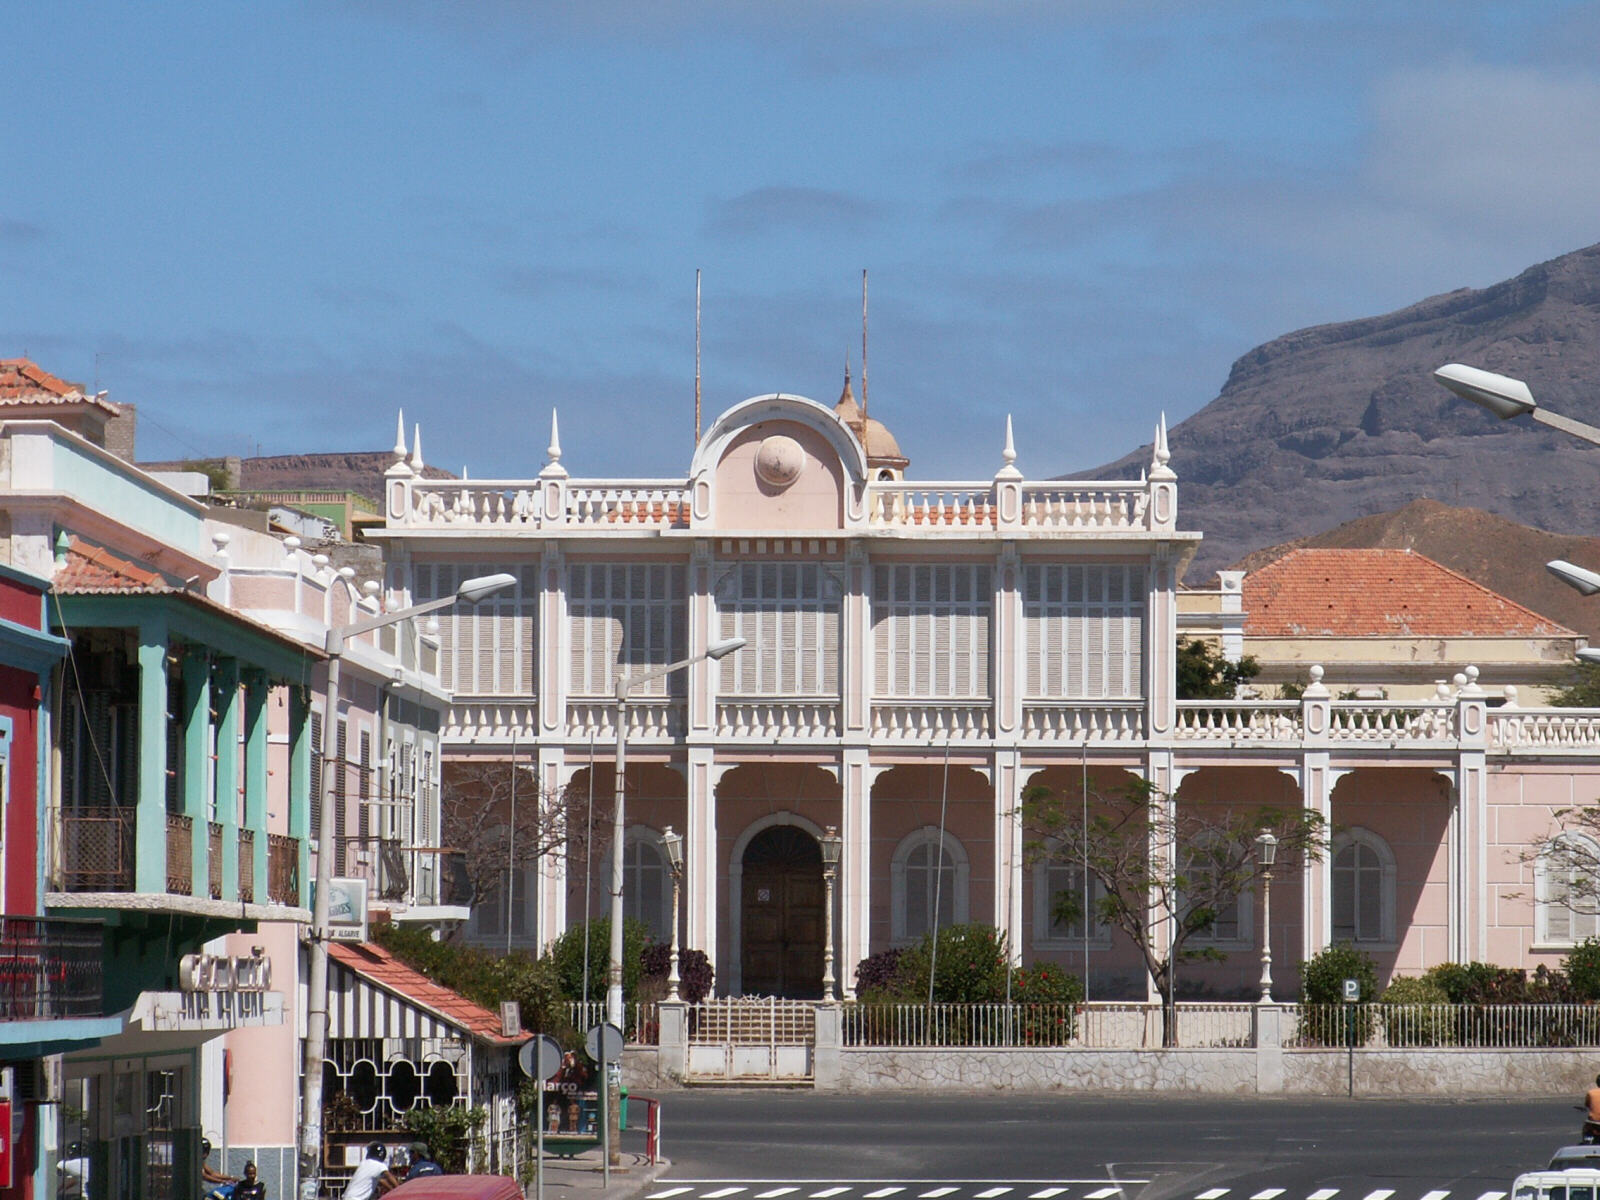 The Presidential palace in Mindelo, Cape Verde